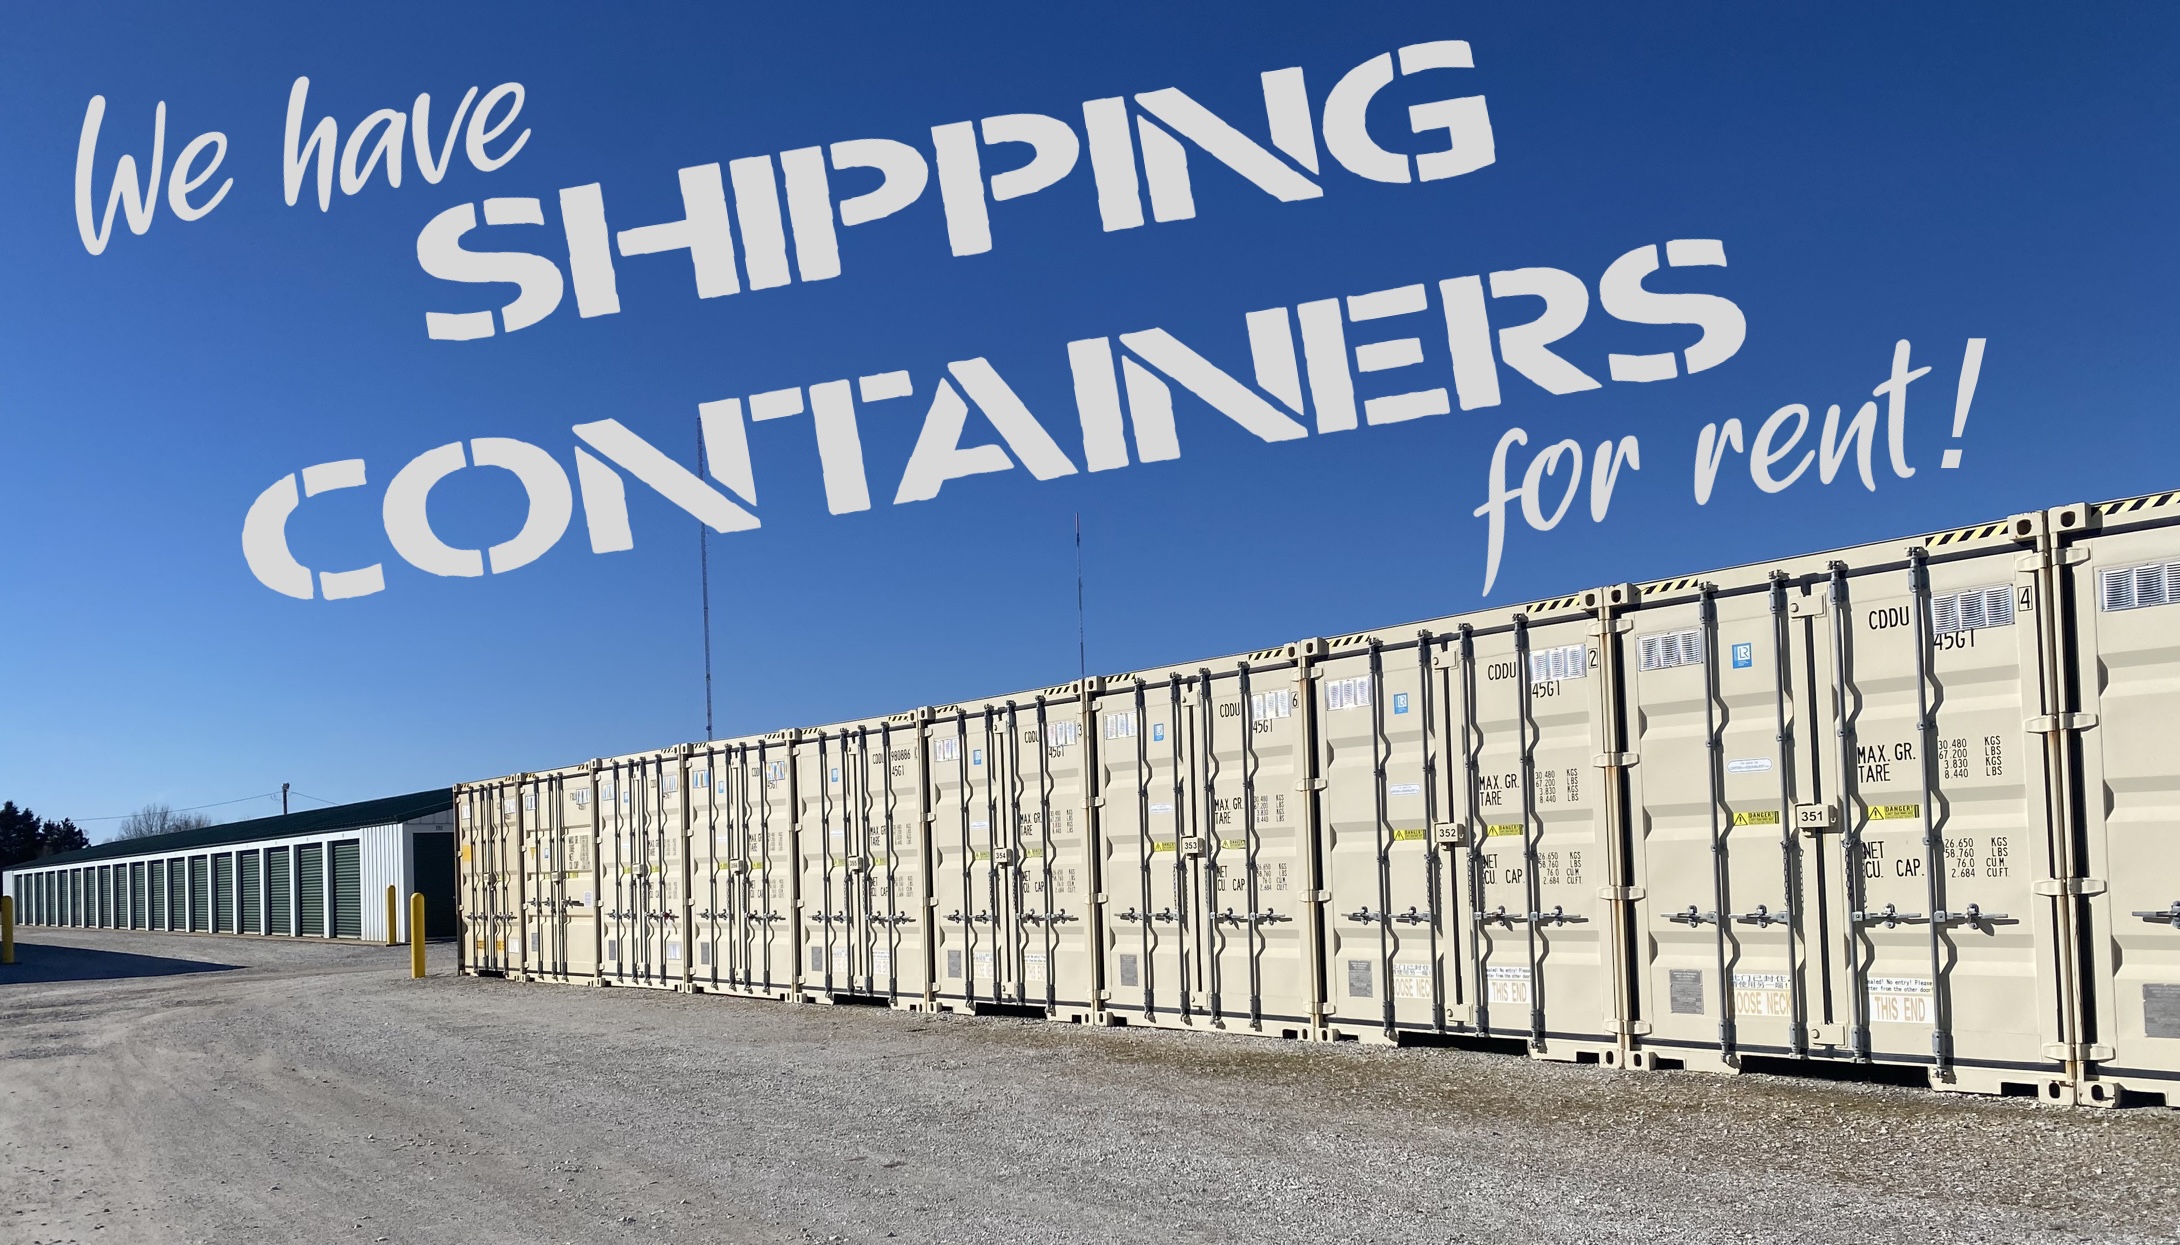 We have shipping containers for rent!